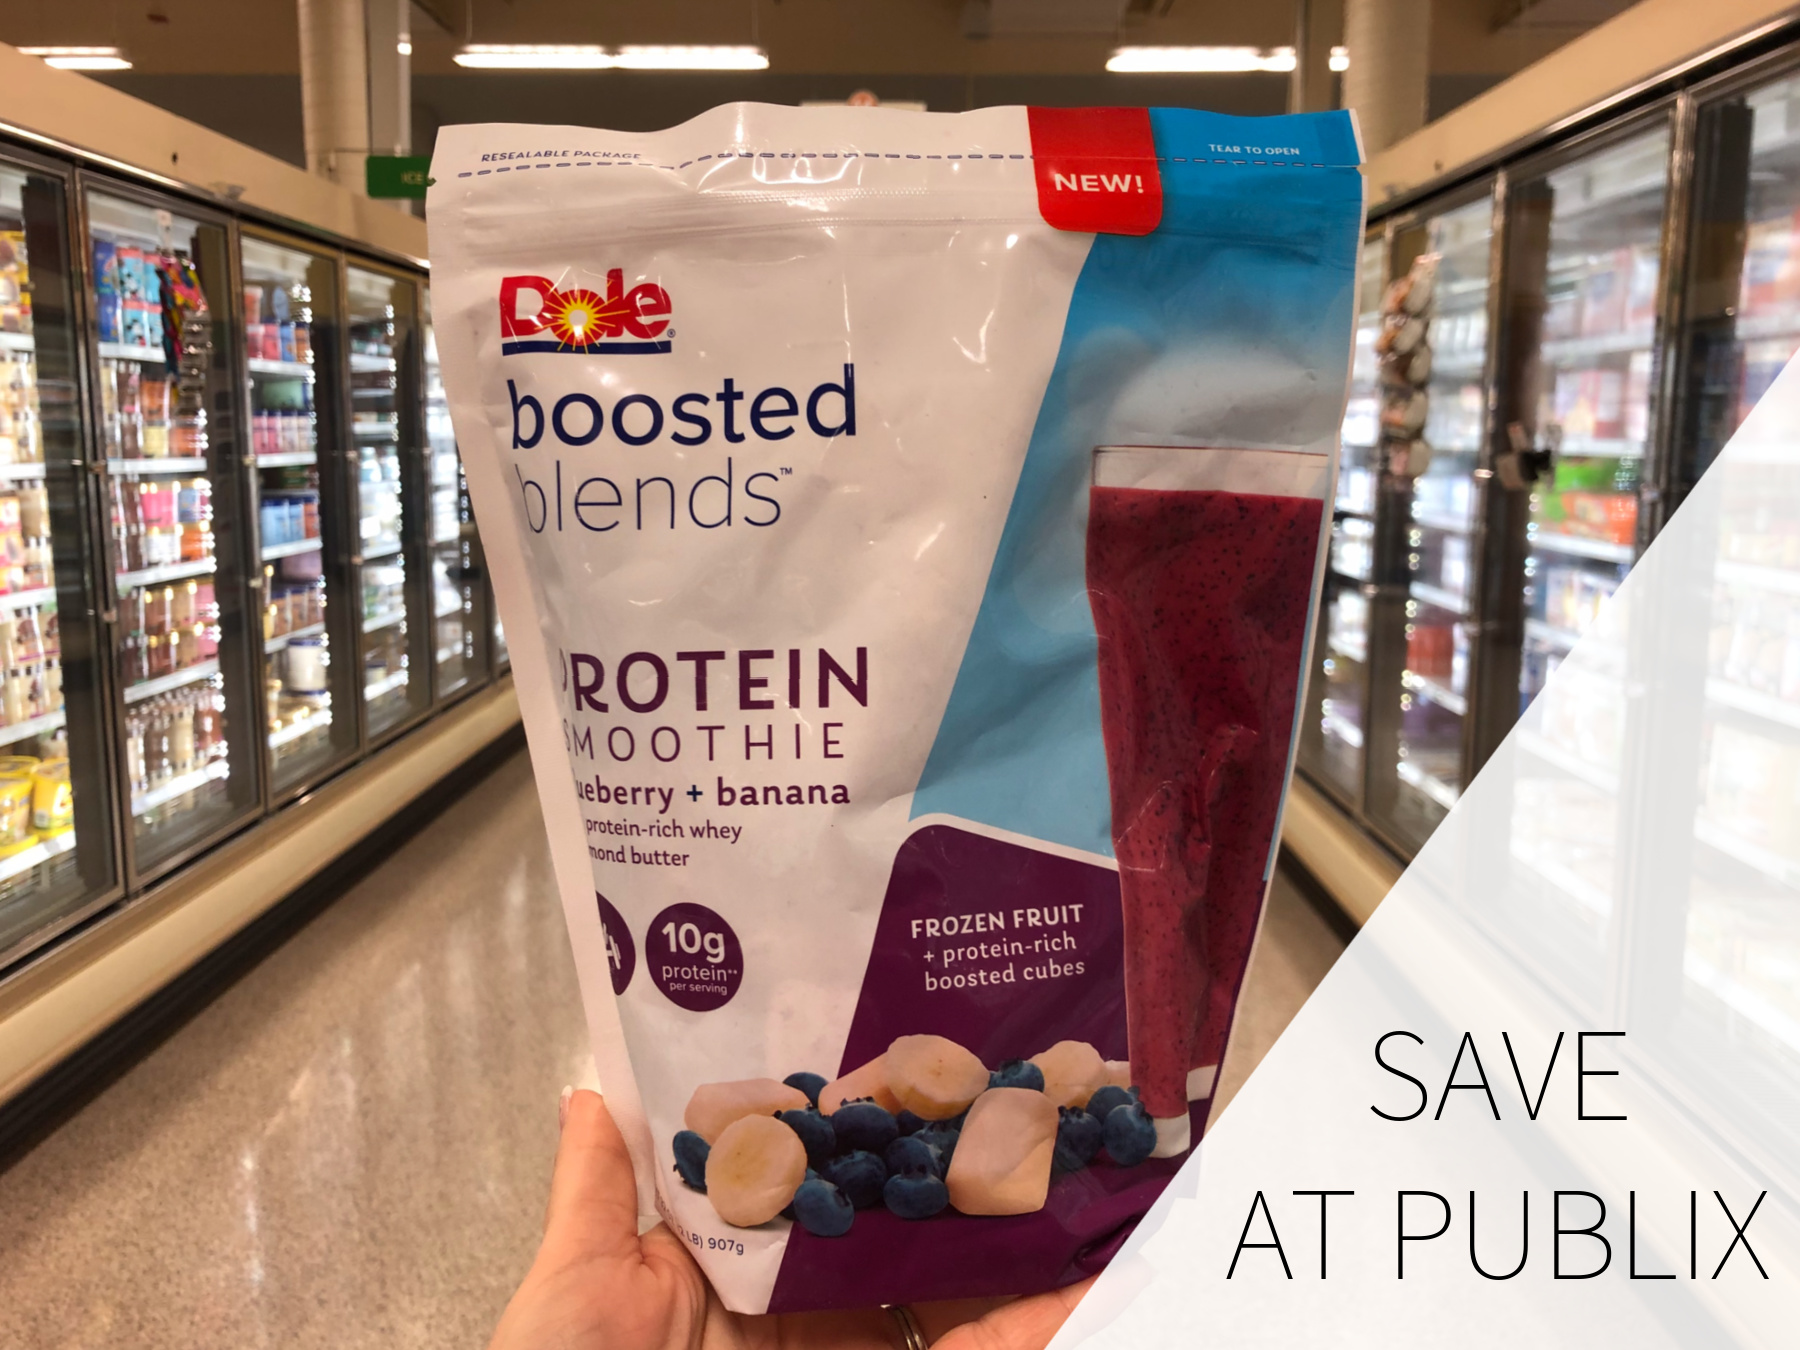 Find Delicious Dole Boosted Blends™ Smoothies With the Frozen Fruit at Publix on I Heart Publix